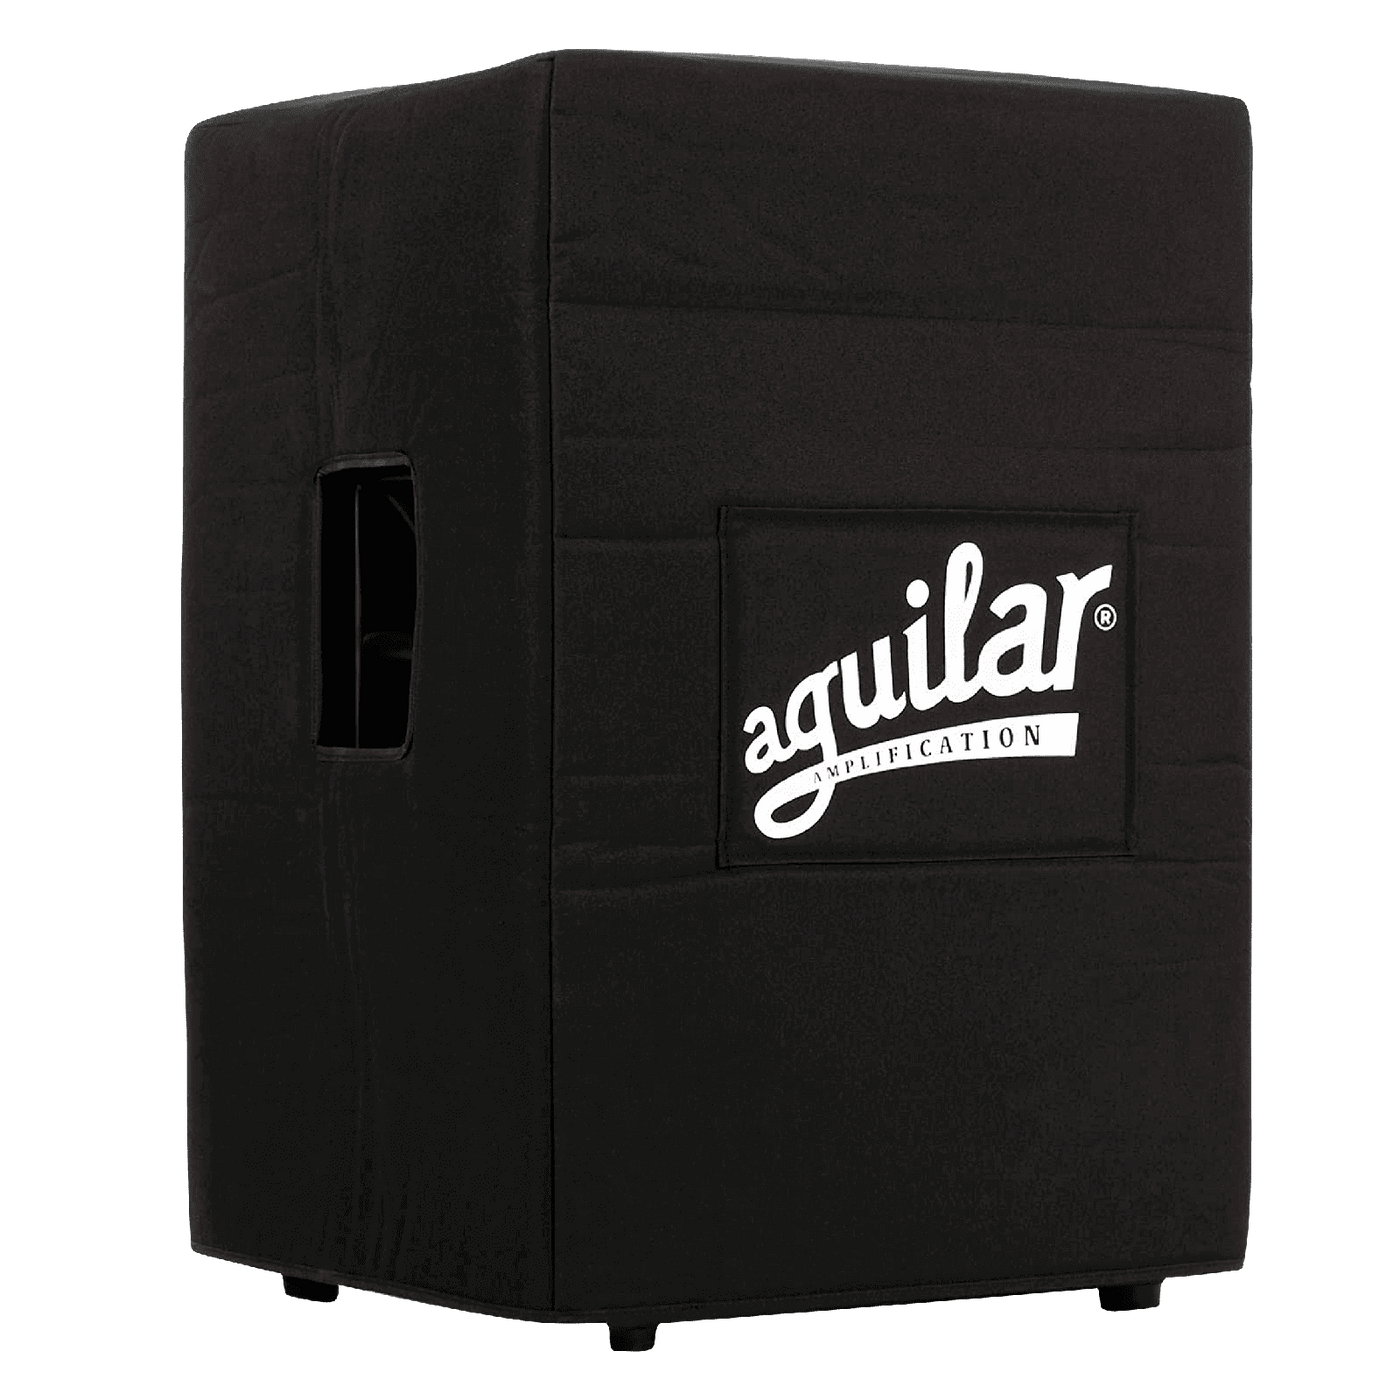 Funda Aguilar SL 212 - The SL 212 offers an unprecedented balance of performance and weight. At only 45 lbs. (20.41 kg), this 4 ohm cabinet handles 500 watts RMS. With a frequency response of 37 Hz–16 kHz, the SL 212 provides the deep lows, articulate mid